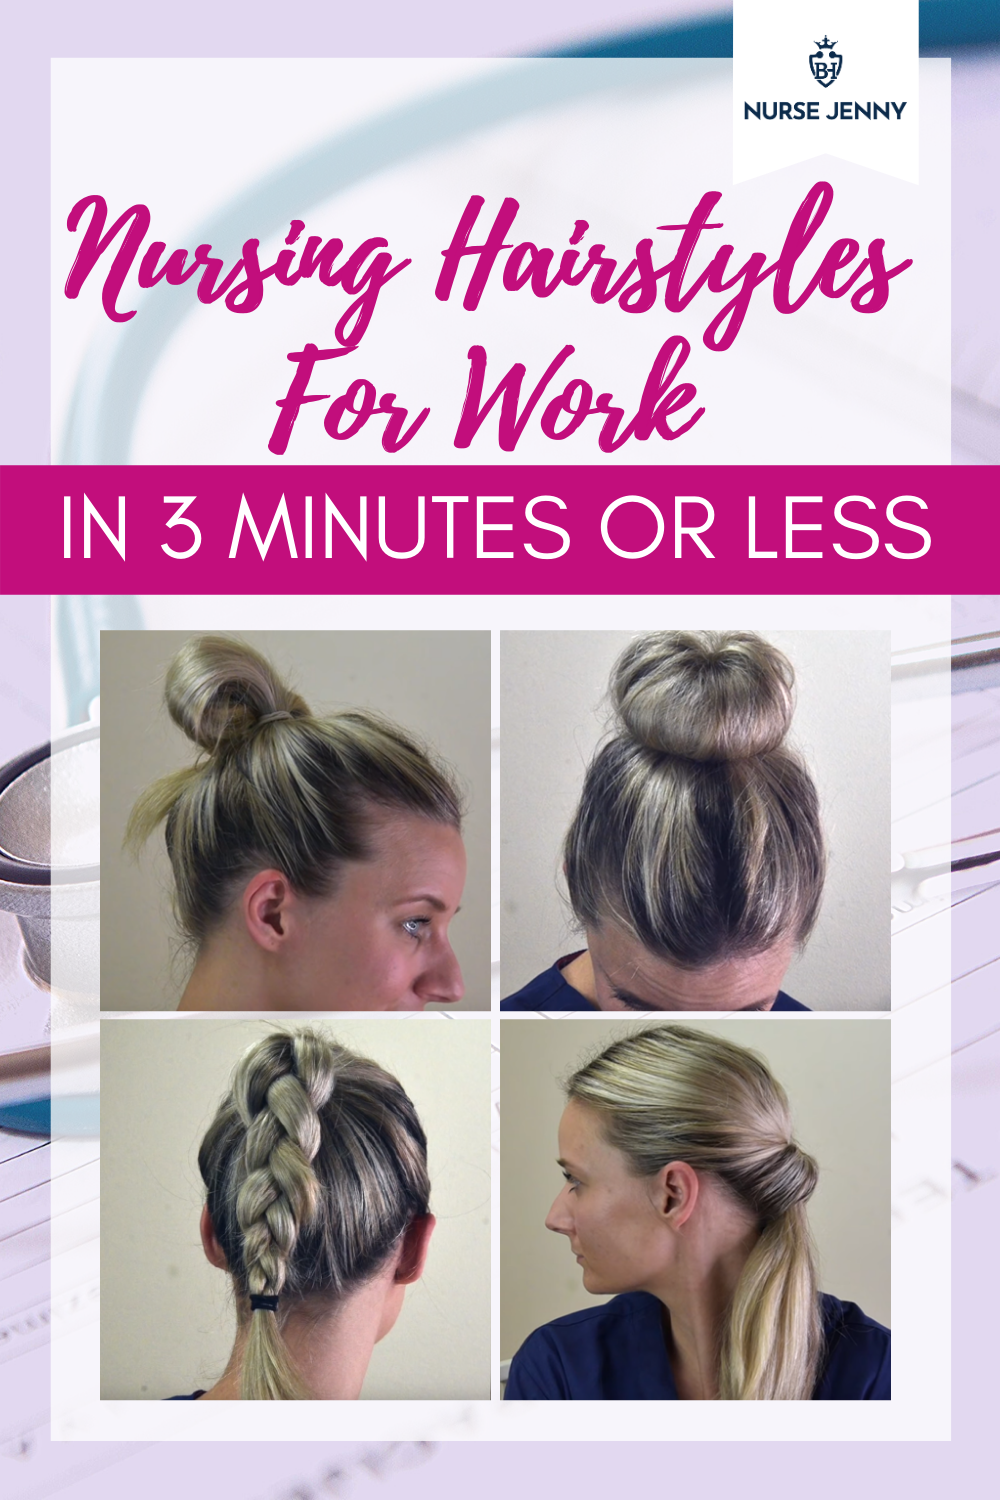 Image of French braid bun hairstyle for nurses